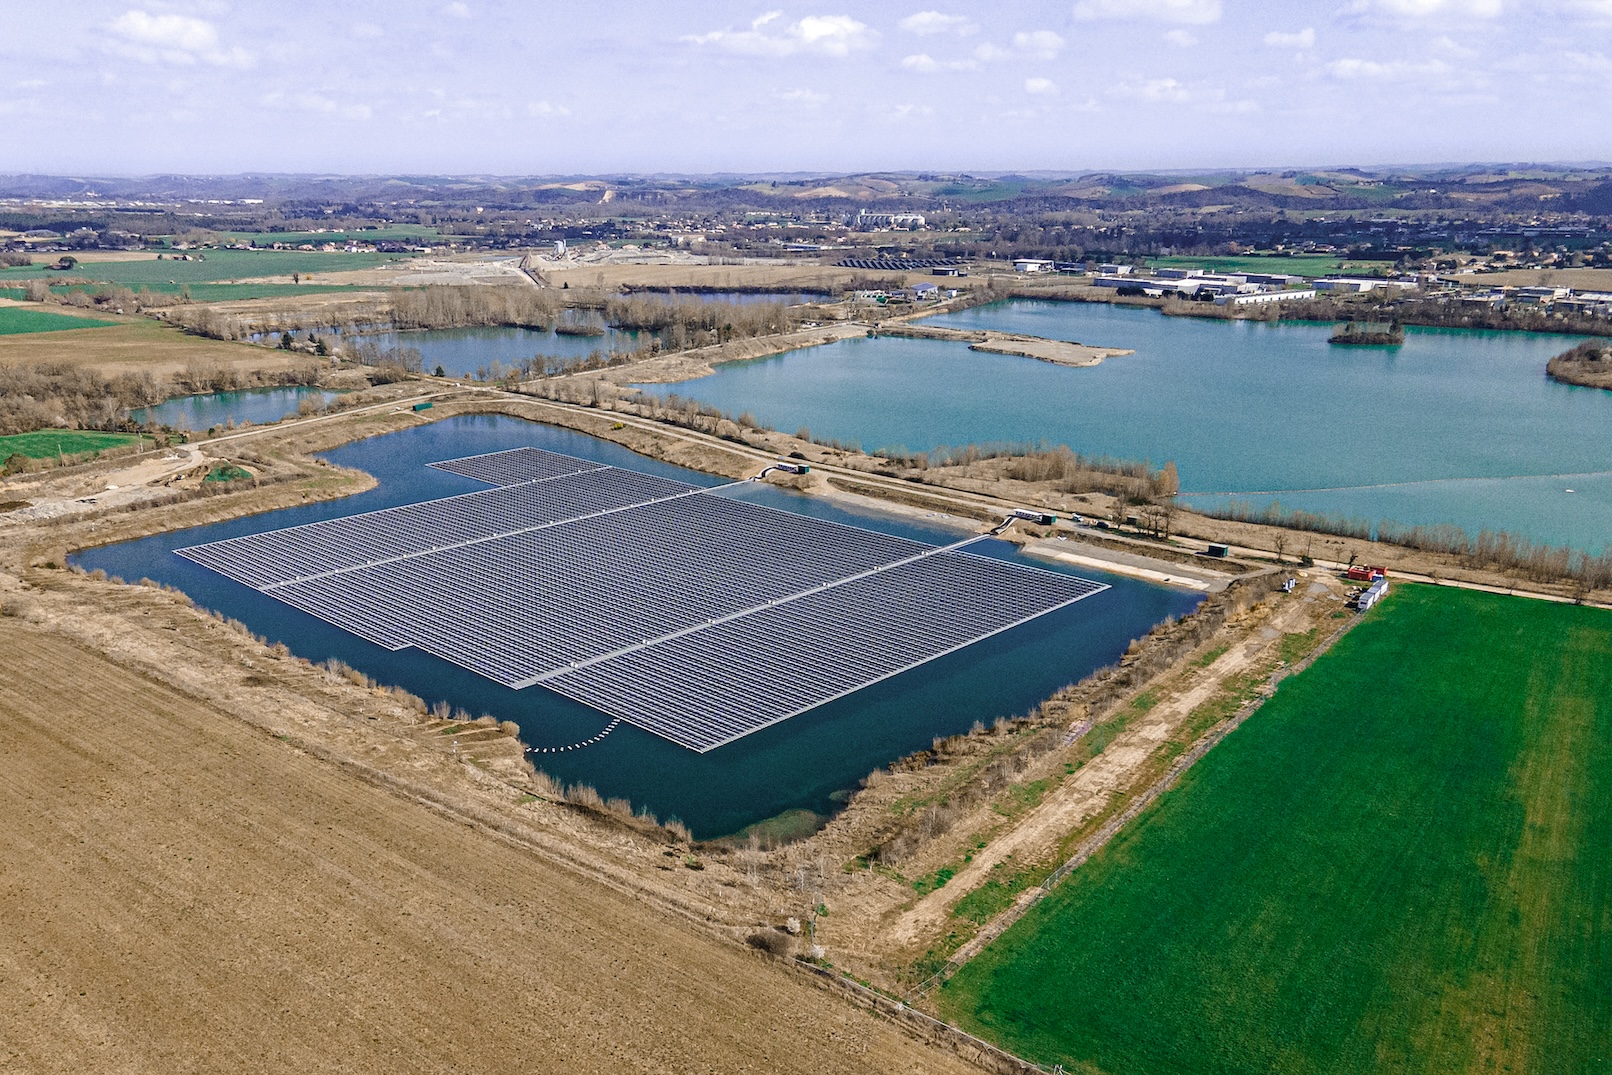 In Peyssies (France), a former sand and gravel quarry has been converted into a floating solar power plant with a capacity of 5,00 MWp.